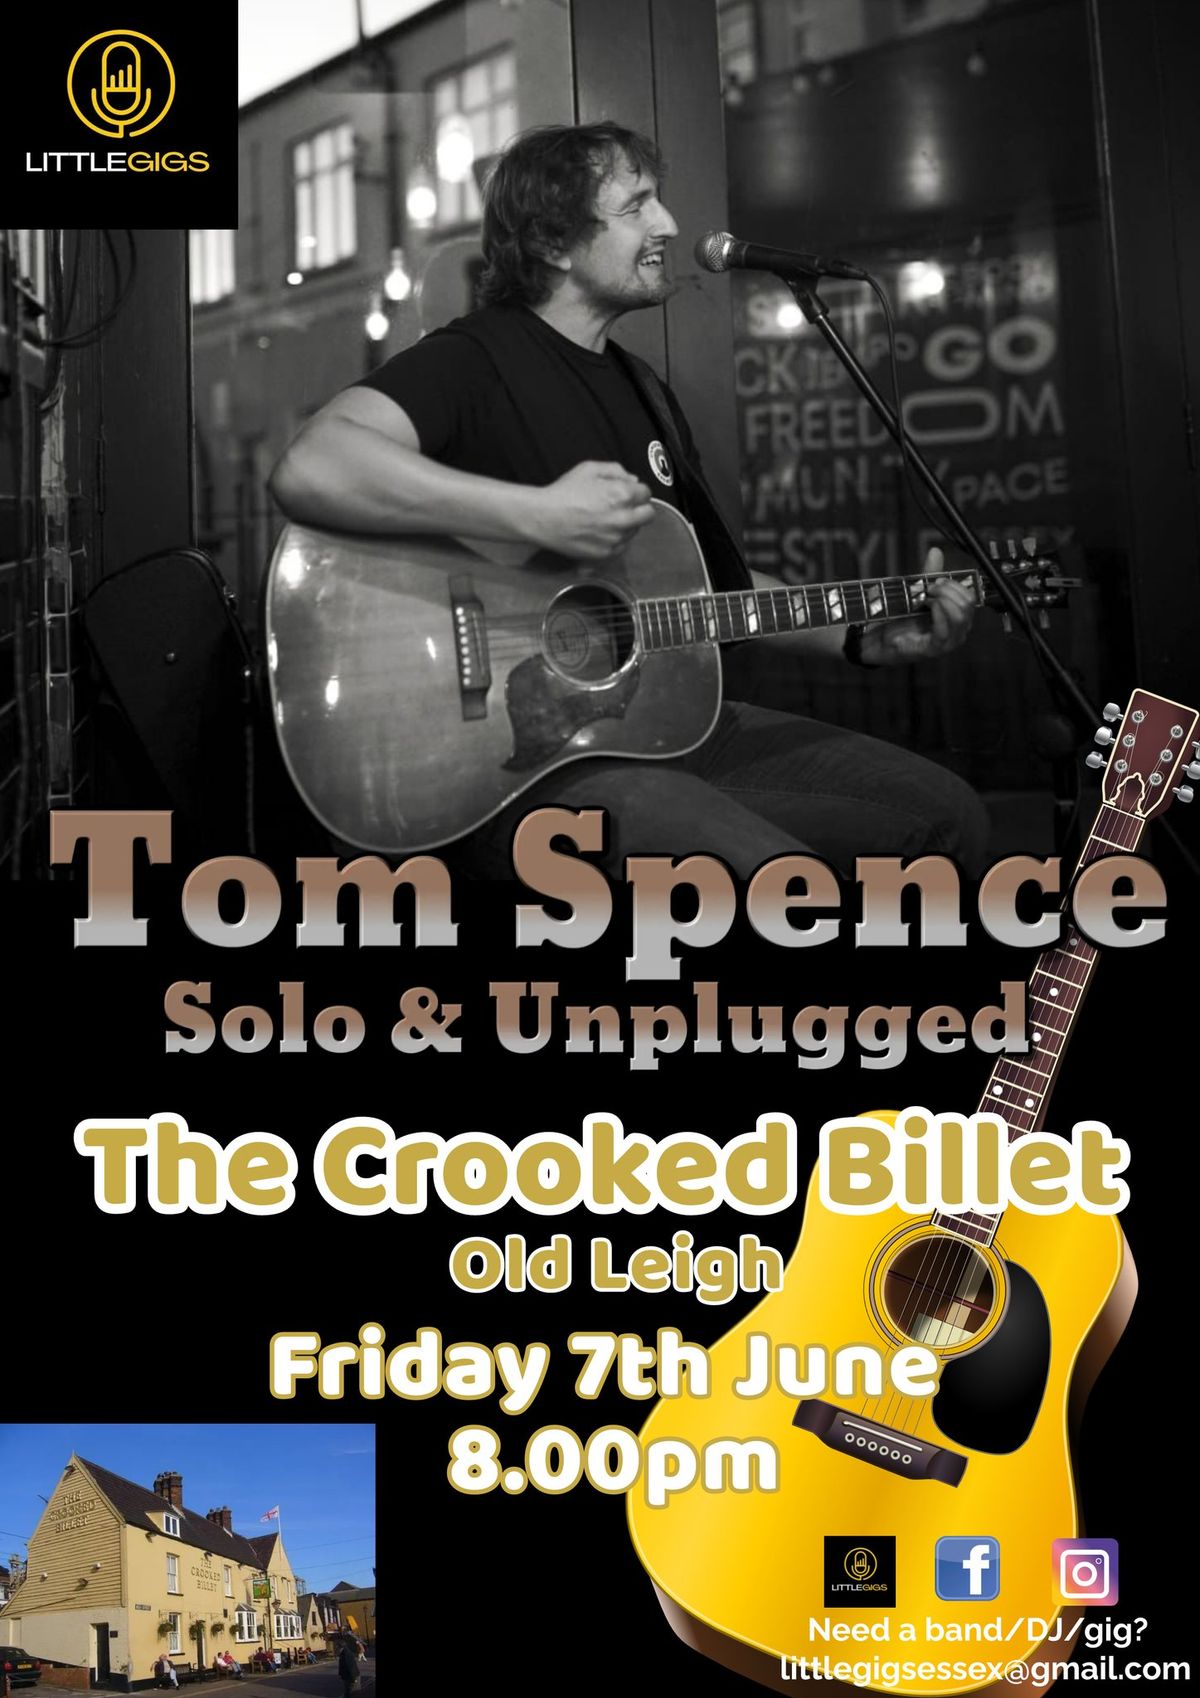 Tom Spence - Solo & Unplugged at The Crooked Billet, Old Leigh ?